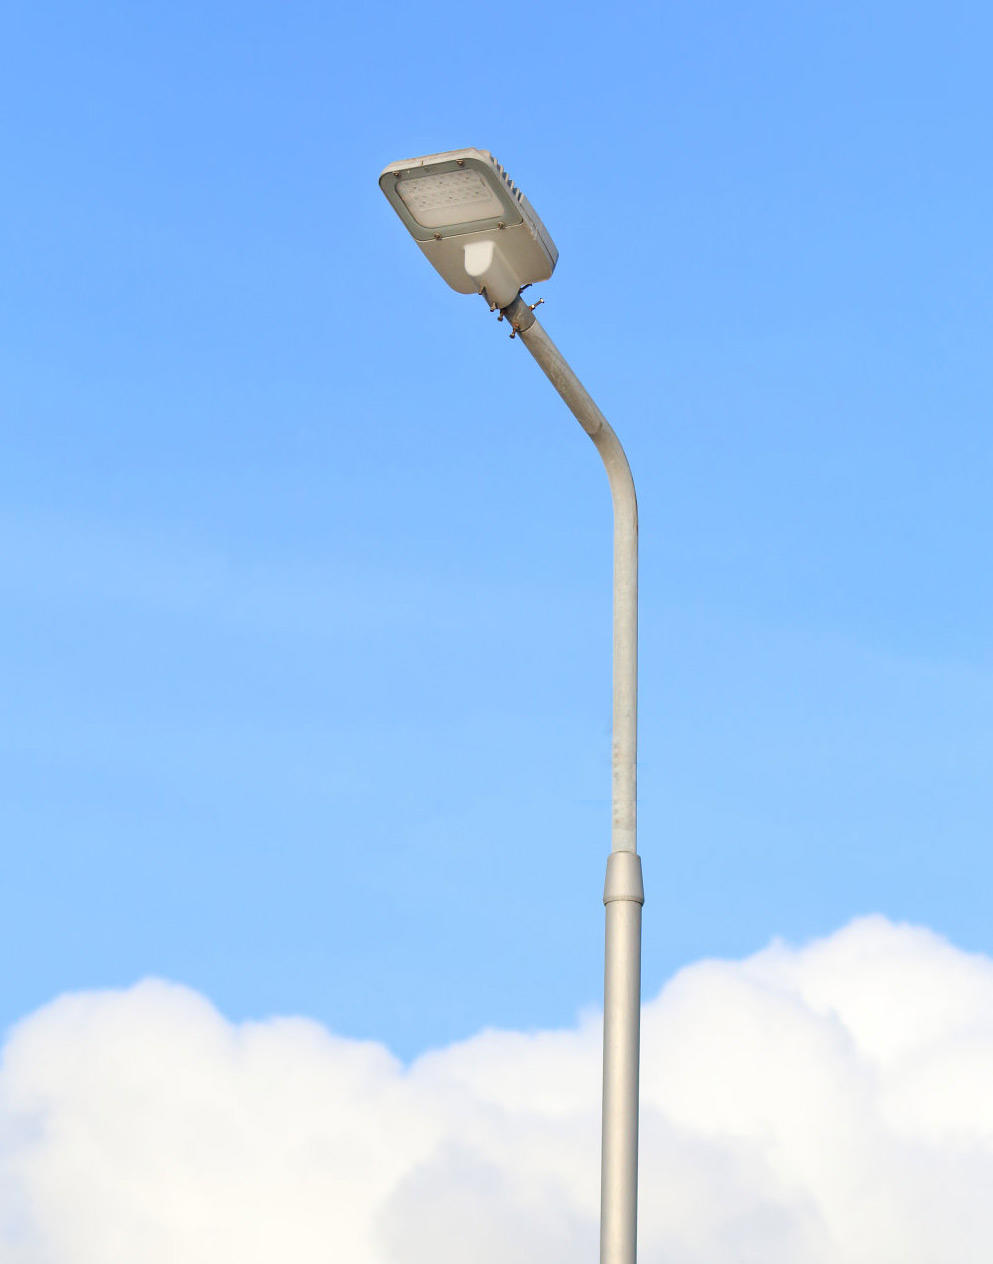 outdoor Custom lamp rohs led street ALLTOP approved